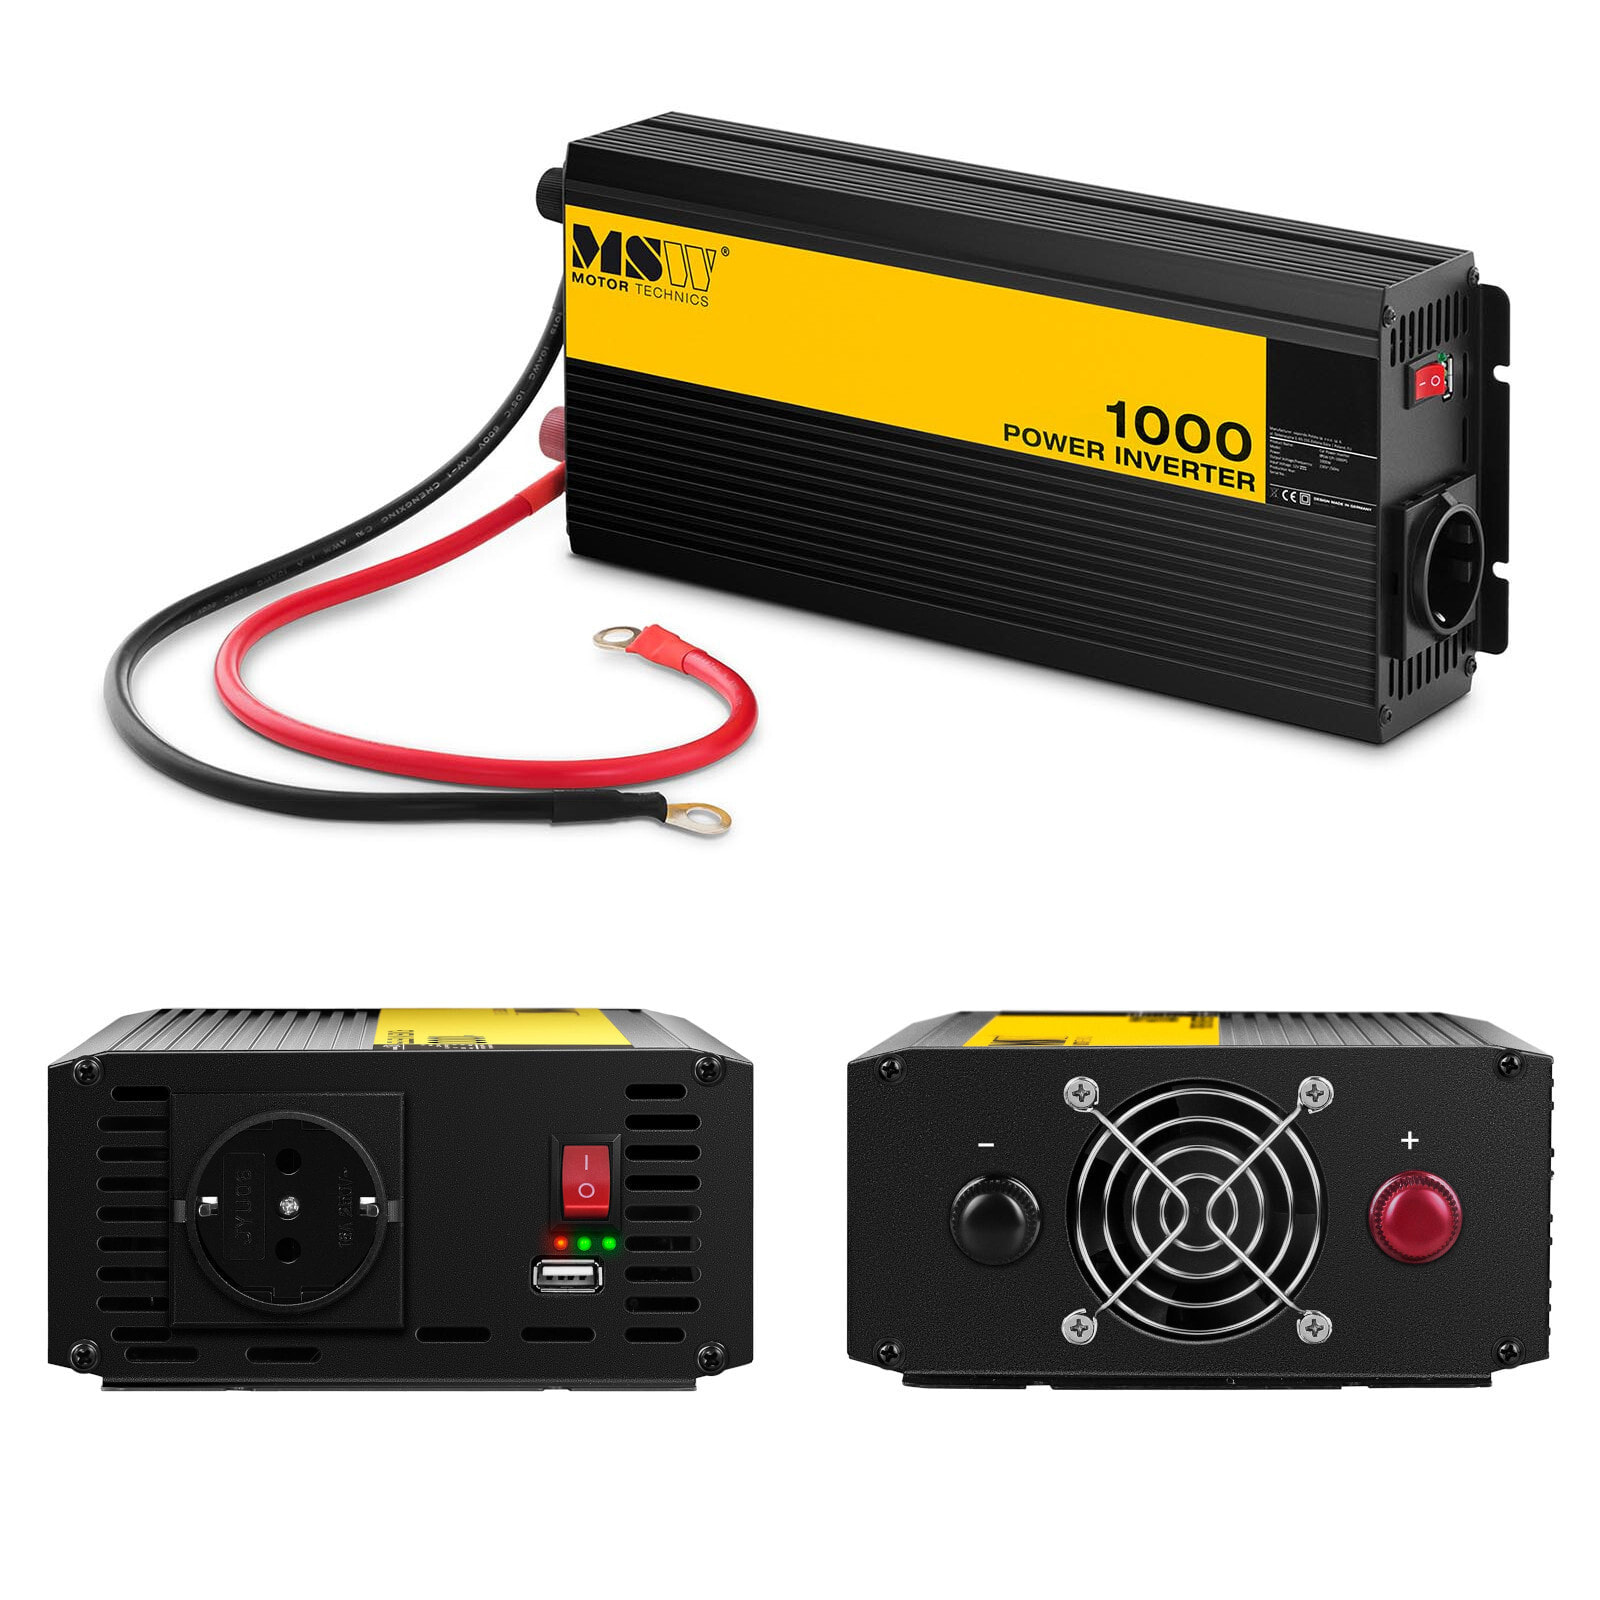 Vehicle voltage converter for 1000 / 2000W battery